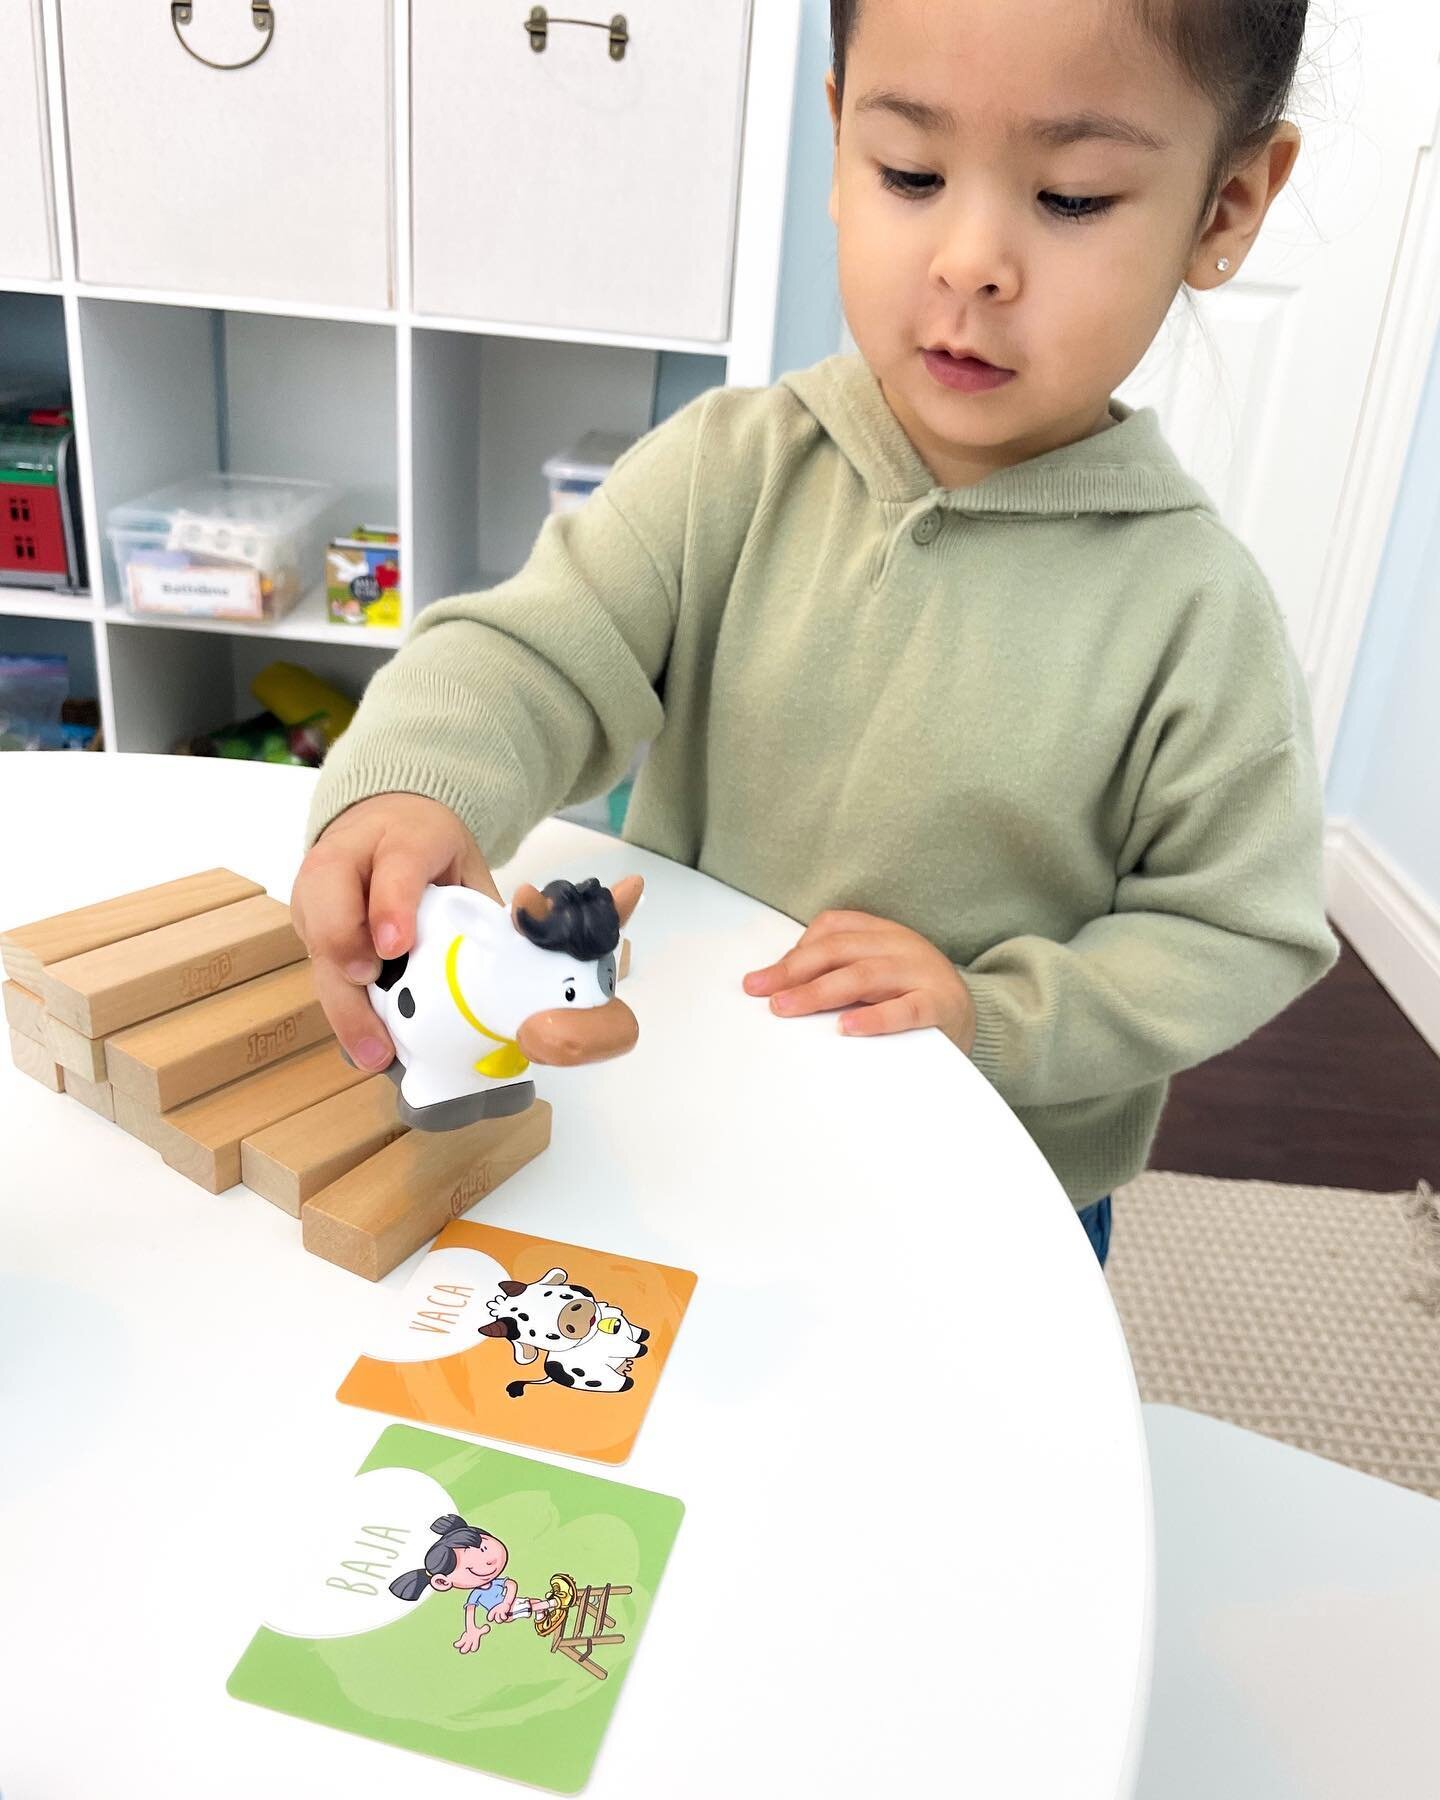 ✨Not sure what a speech session might look like with a young child with CAS? ✨

A sample session: &nbsp;
&nbsp;
🗃️Materials: some blocks, two animals

🎯Targets: 2-3 CVCV words with consonant changes (baja, vaca, mono). 
&nbsp;
1️⃣ Drill (10 minutes